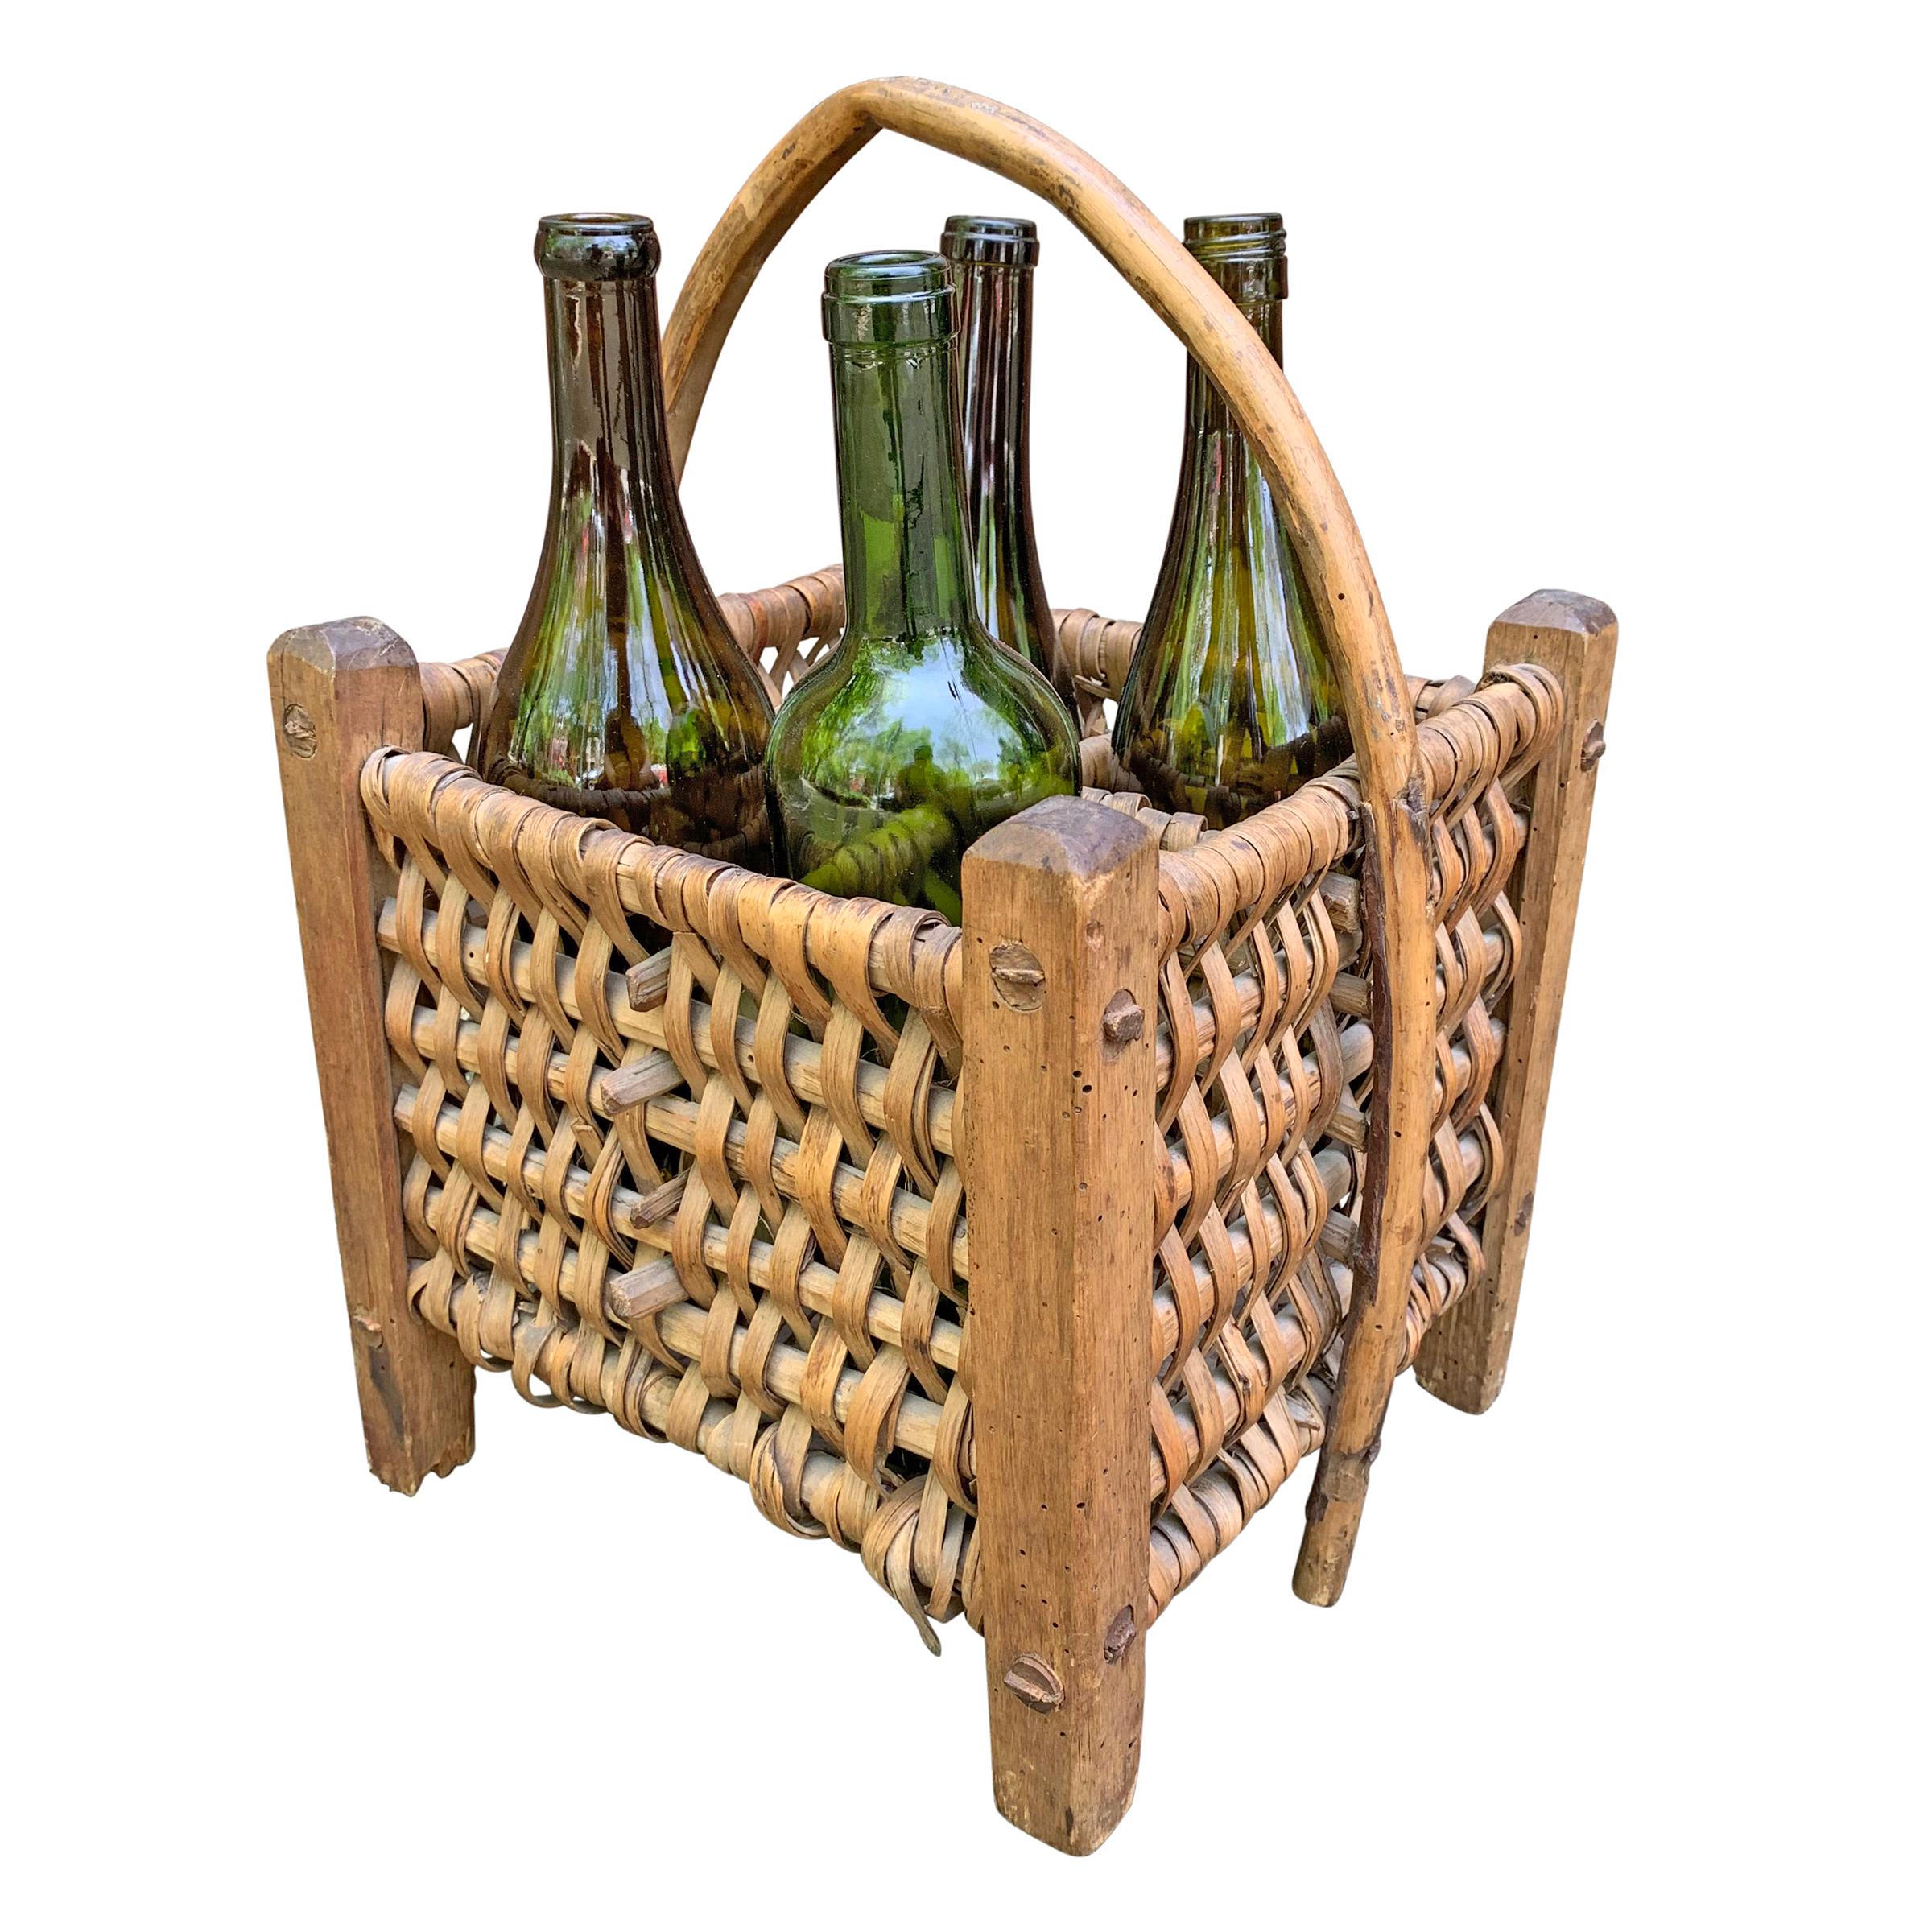 An early 20th century French wine carrier basket originally used to carry bottles from a vineyard cellar to the tasting room.